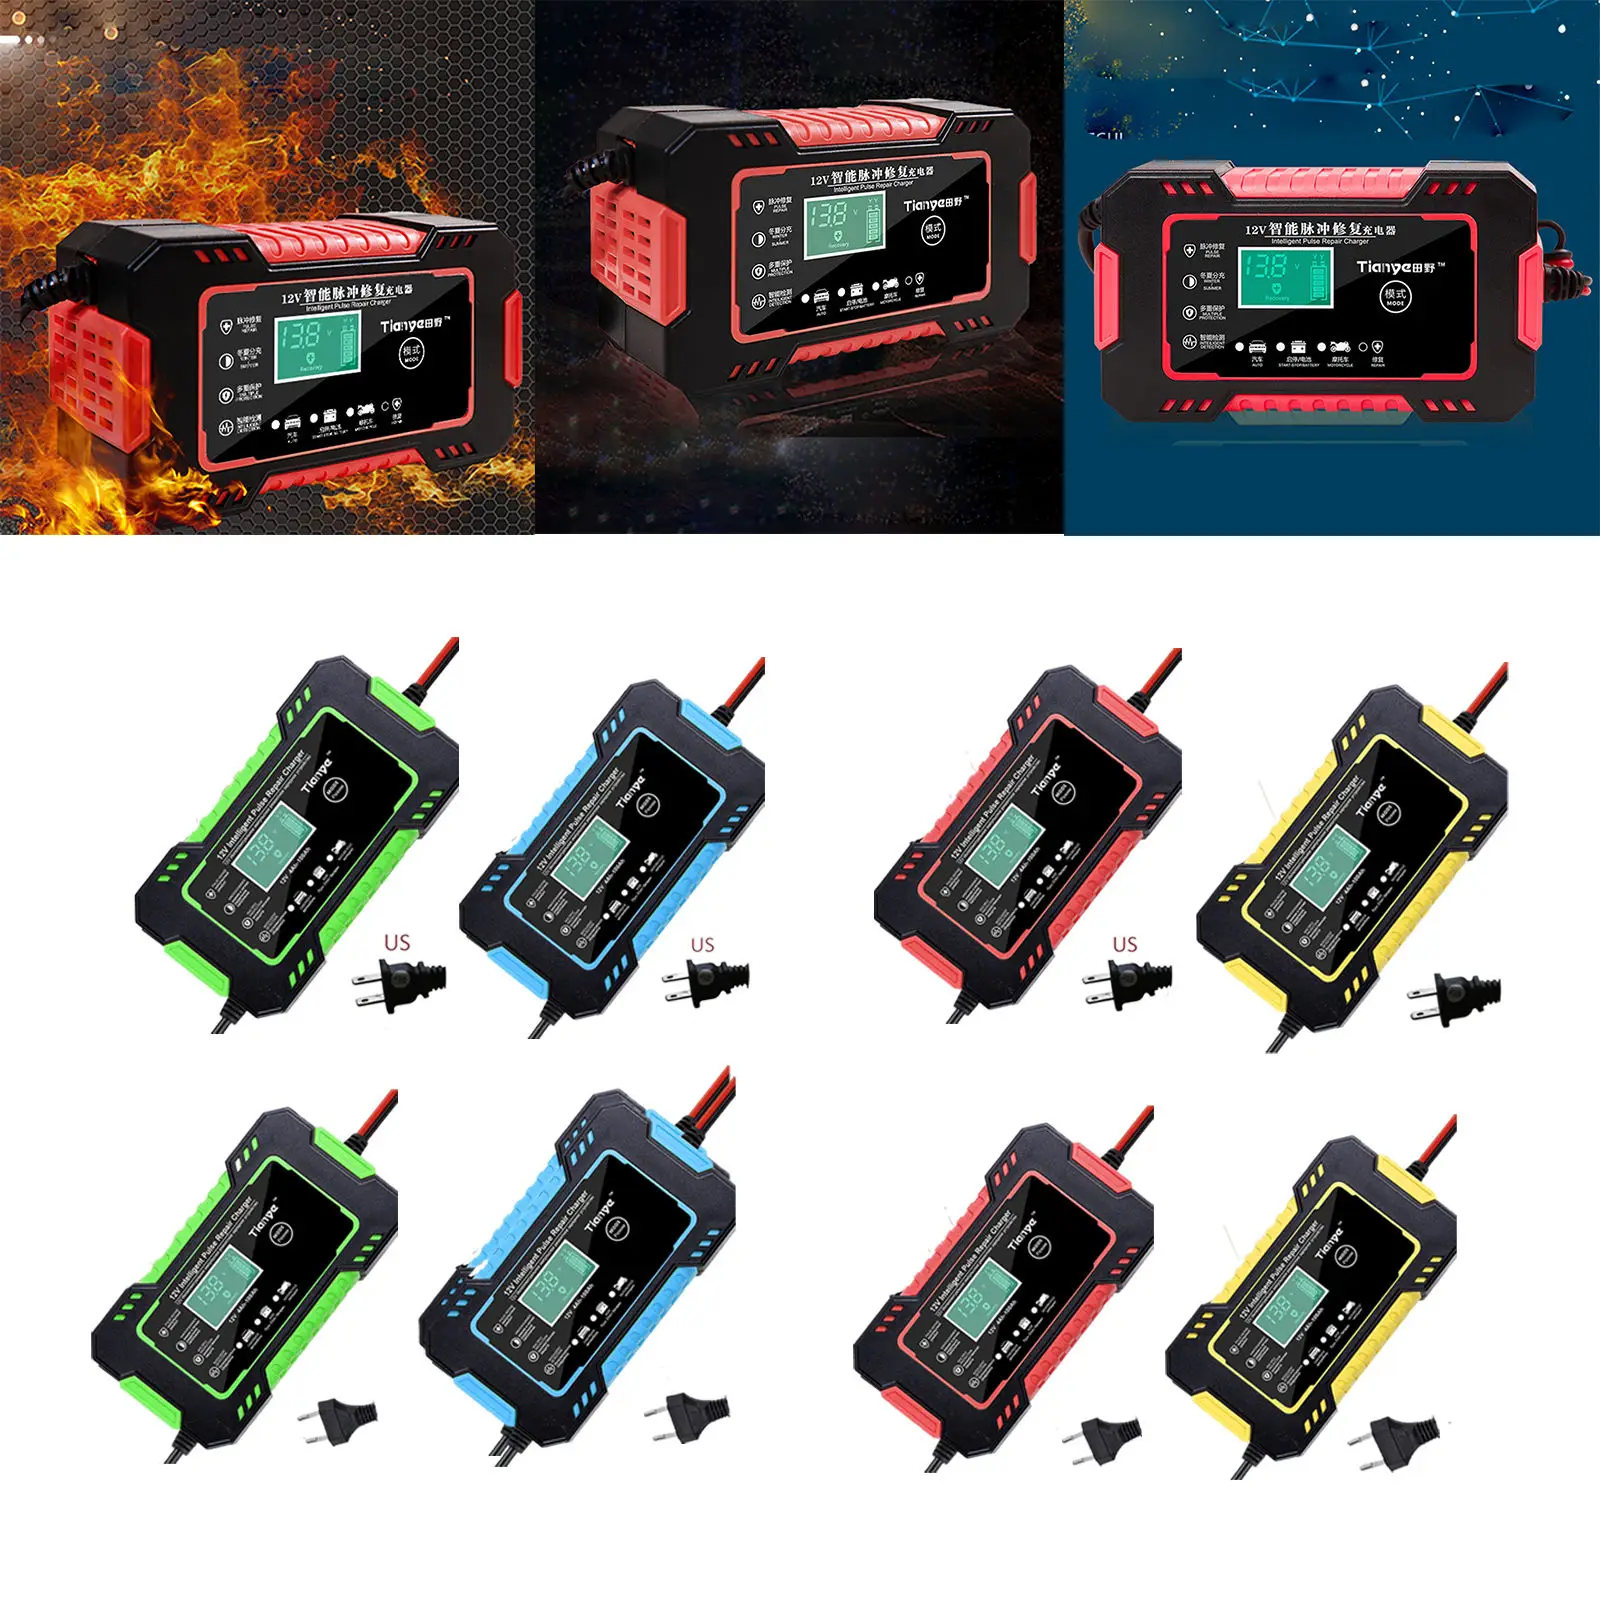 Car Battery Charger 12V 6A LCD Display Trickle Charger Intelligent Fit for Car Truck Fully-Automatic Smart Charger